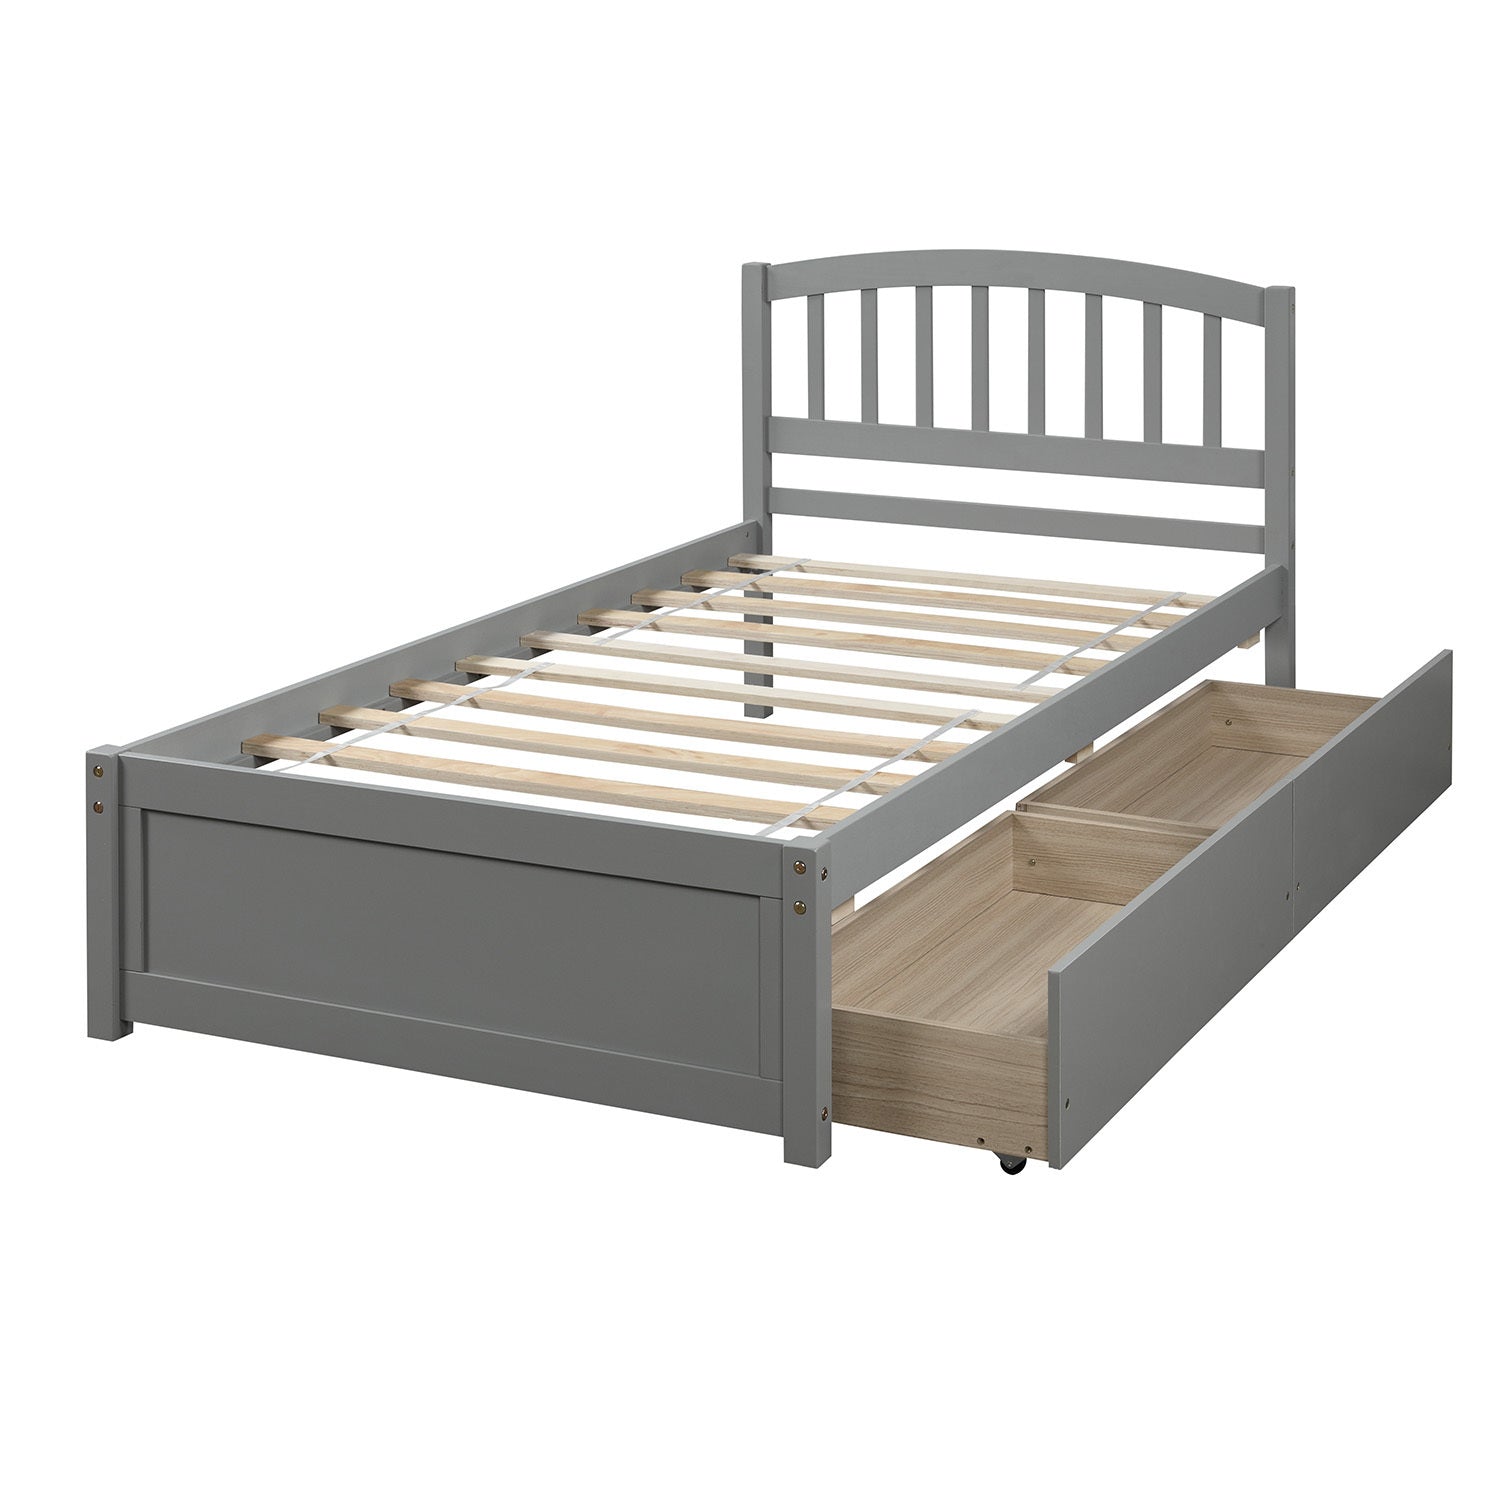 Twin Platform Storage Bed Wood Bed Frame with Two Drawers and Headboard, Gray